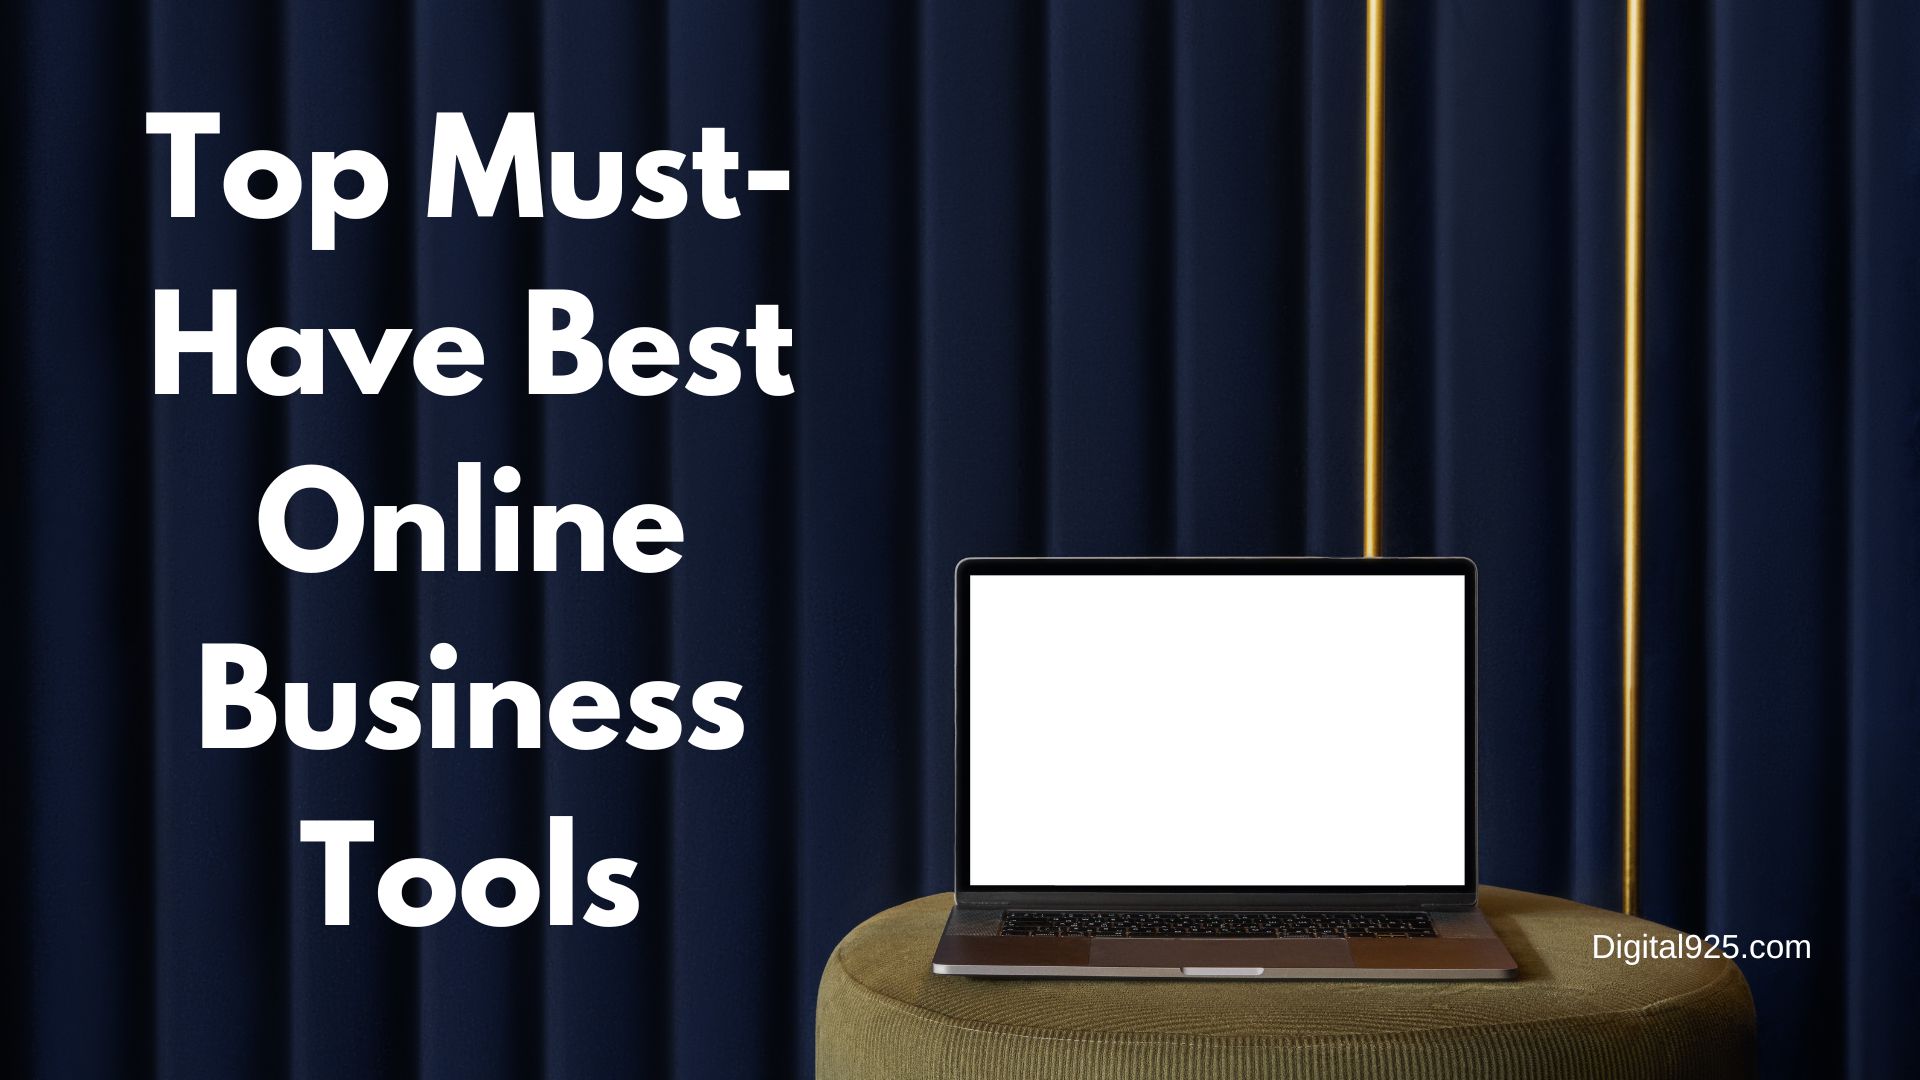 Top Must-Have Best Online Business Tools